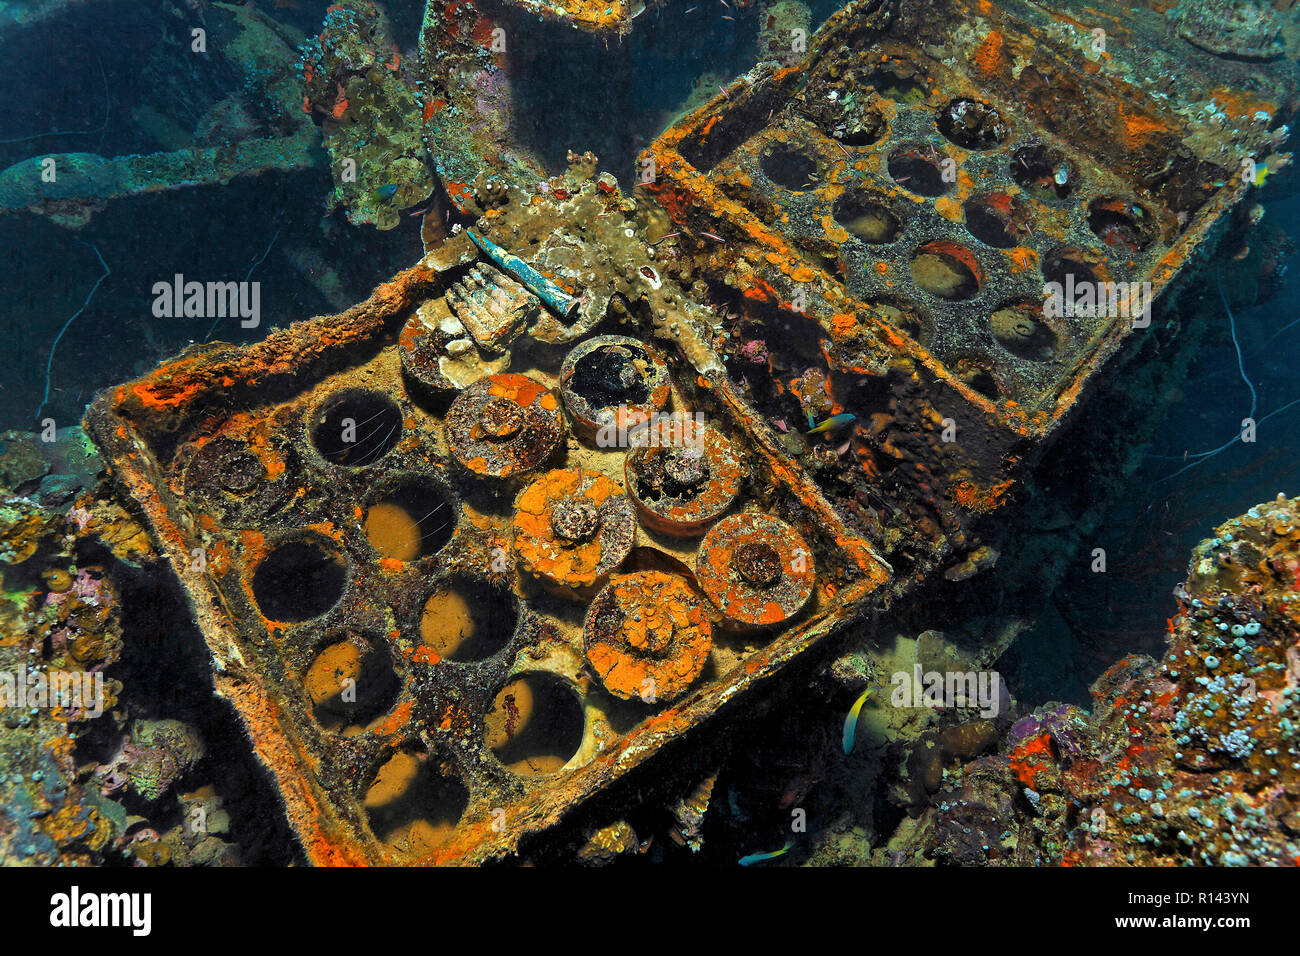 Armed munitions inside the Helmet wreck, a japanese Army Cargo Ship of the WW II, Palau, Micronesia Stock Photo